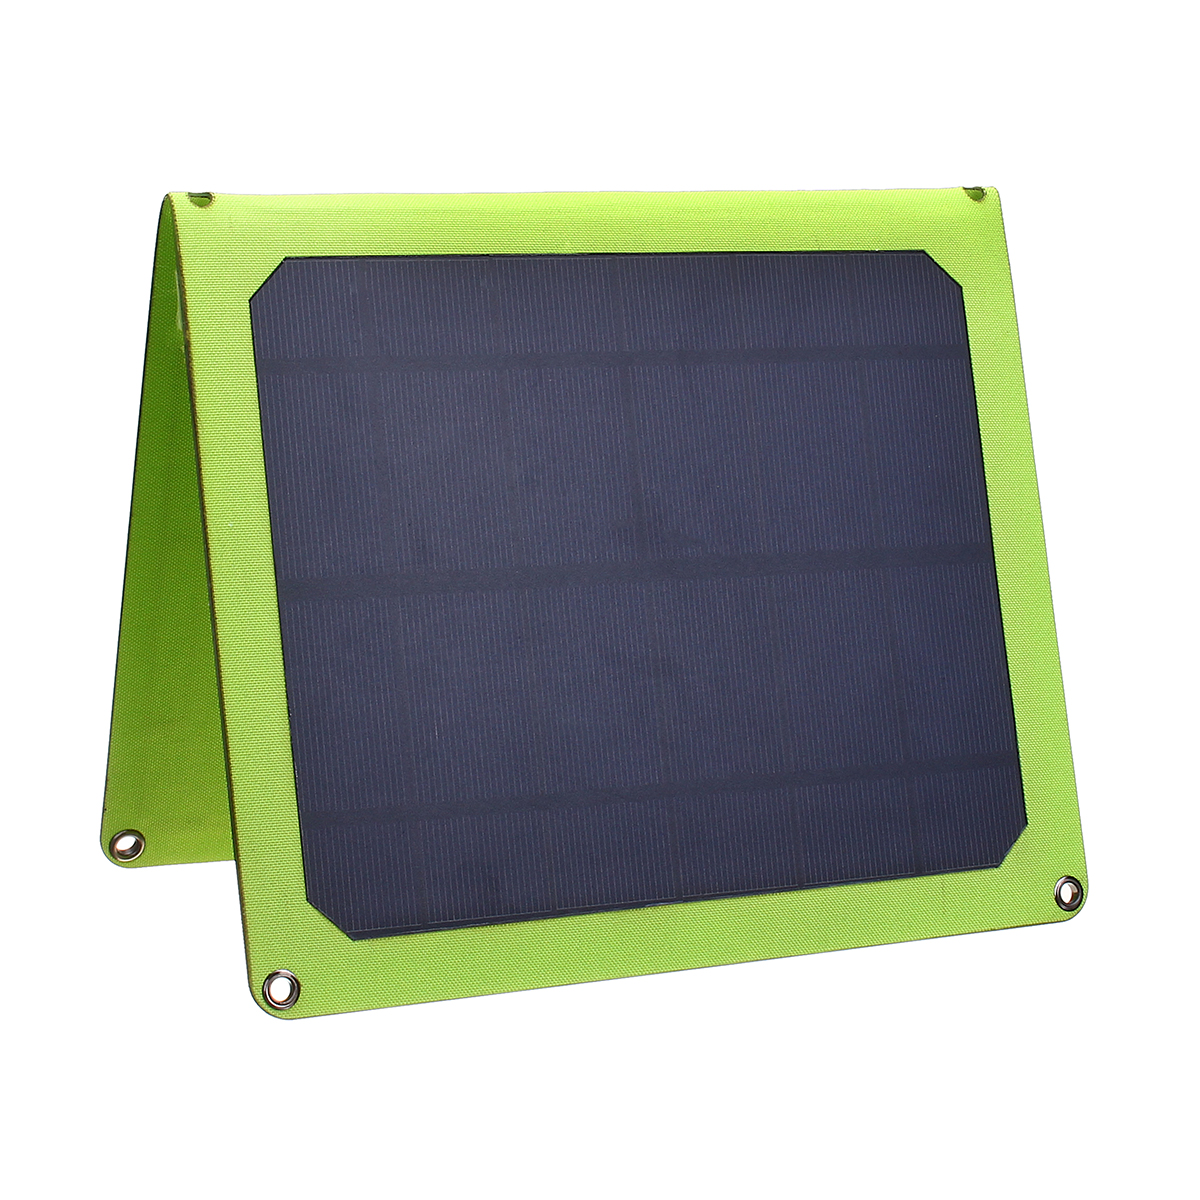 5V 14W Portable Folding Single Crystal Solar Panel with USB Socket for Outdoor 13